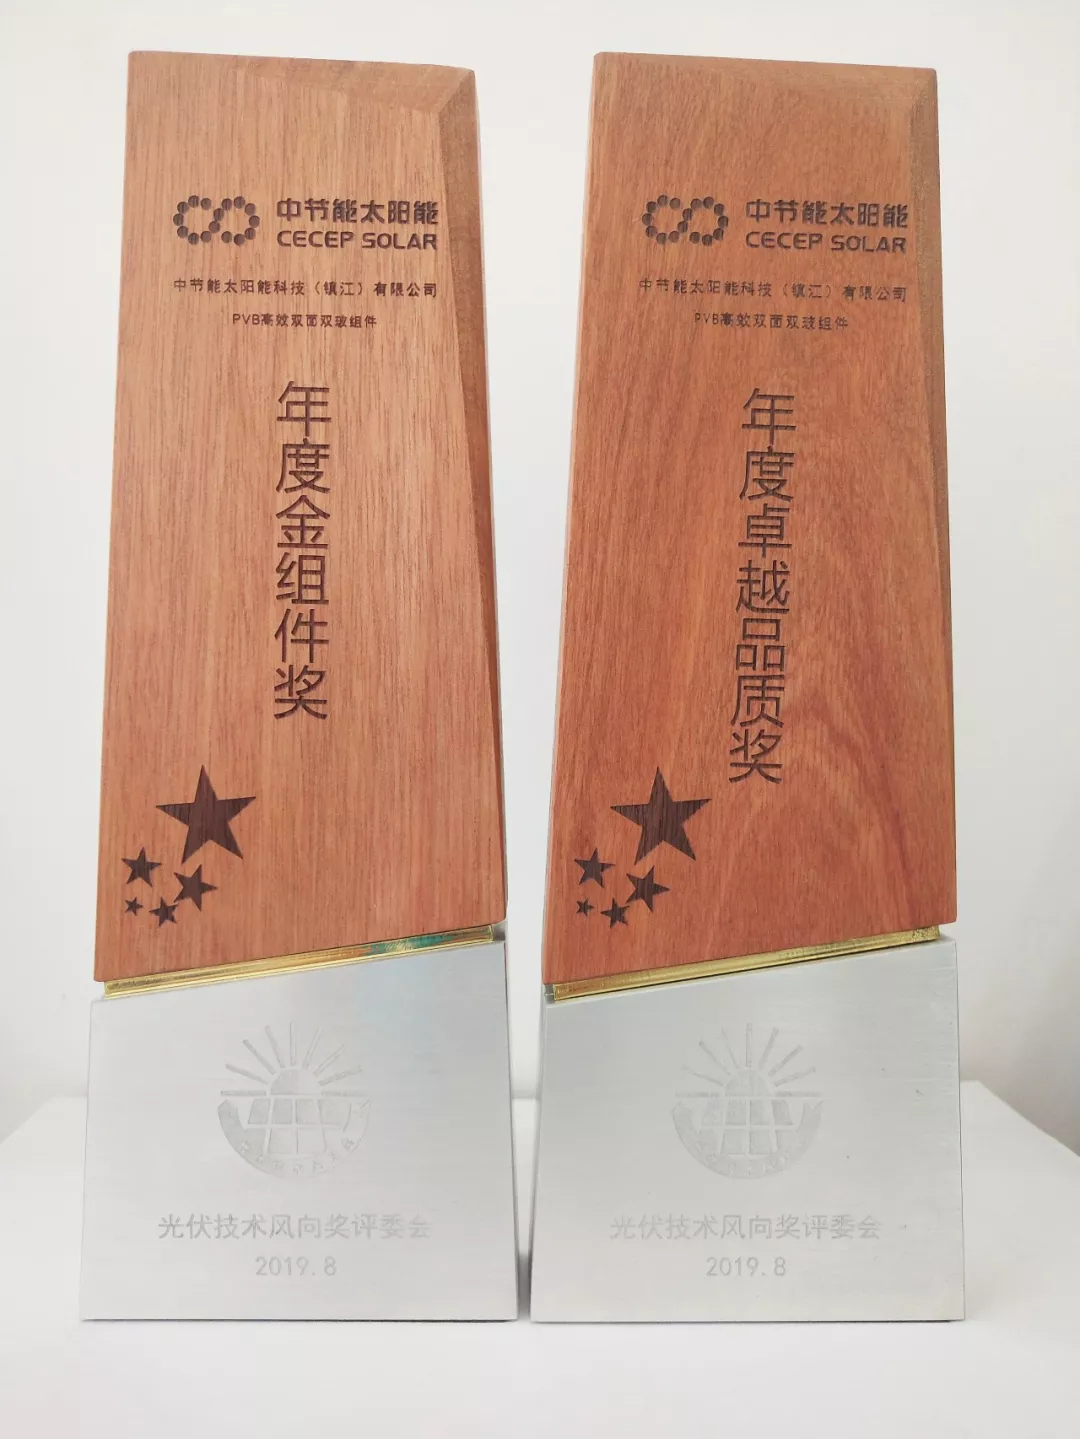 CECEP Solar Energy Technology (Zhenjiang) Co., Ltd. Is Awarded the “Annual Excellent Quality Award & Annual Golden Module Award”